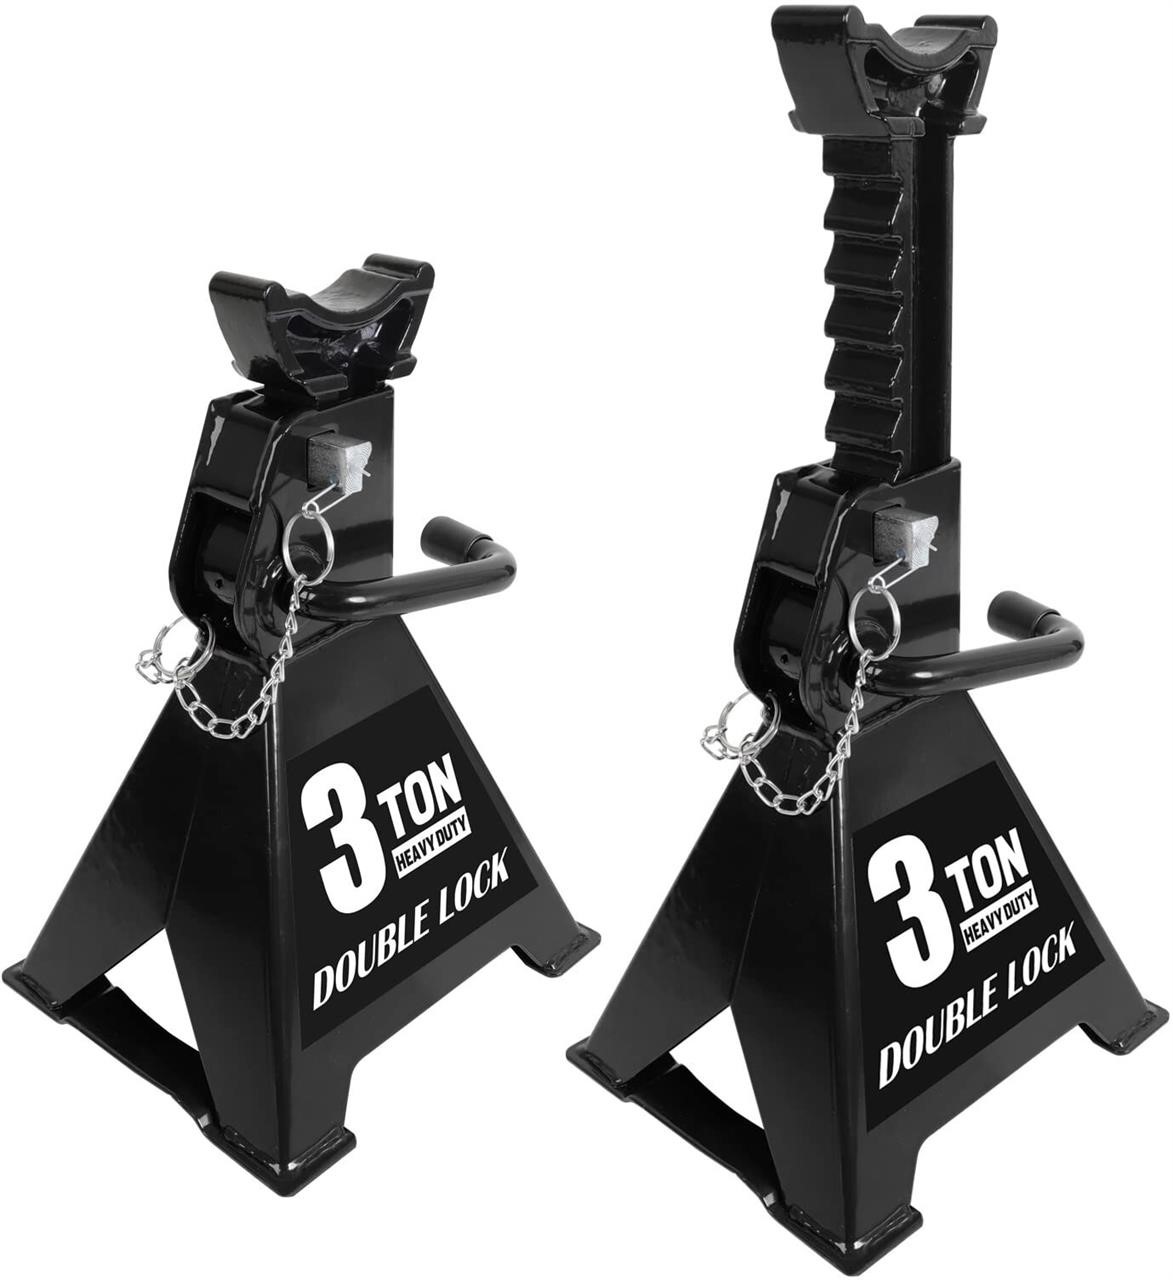 Torin AT43005AB Steel Heavy Duty Jack Stands: Doub